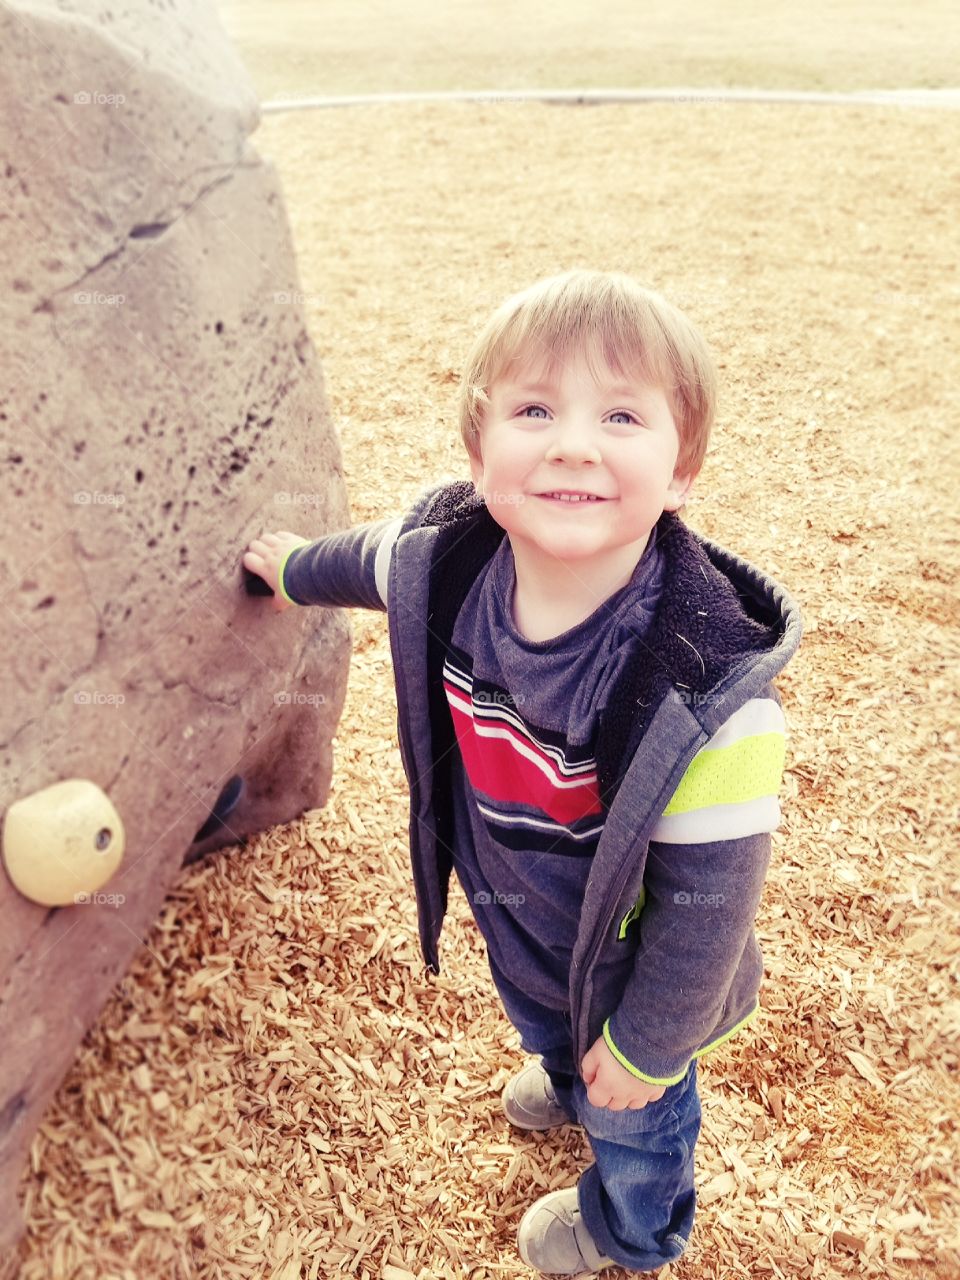 my three year old, among, handsome son, on family play time. we went to the park.